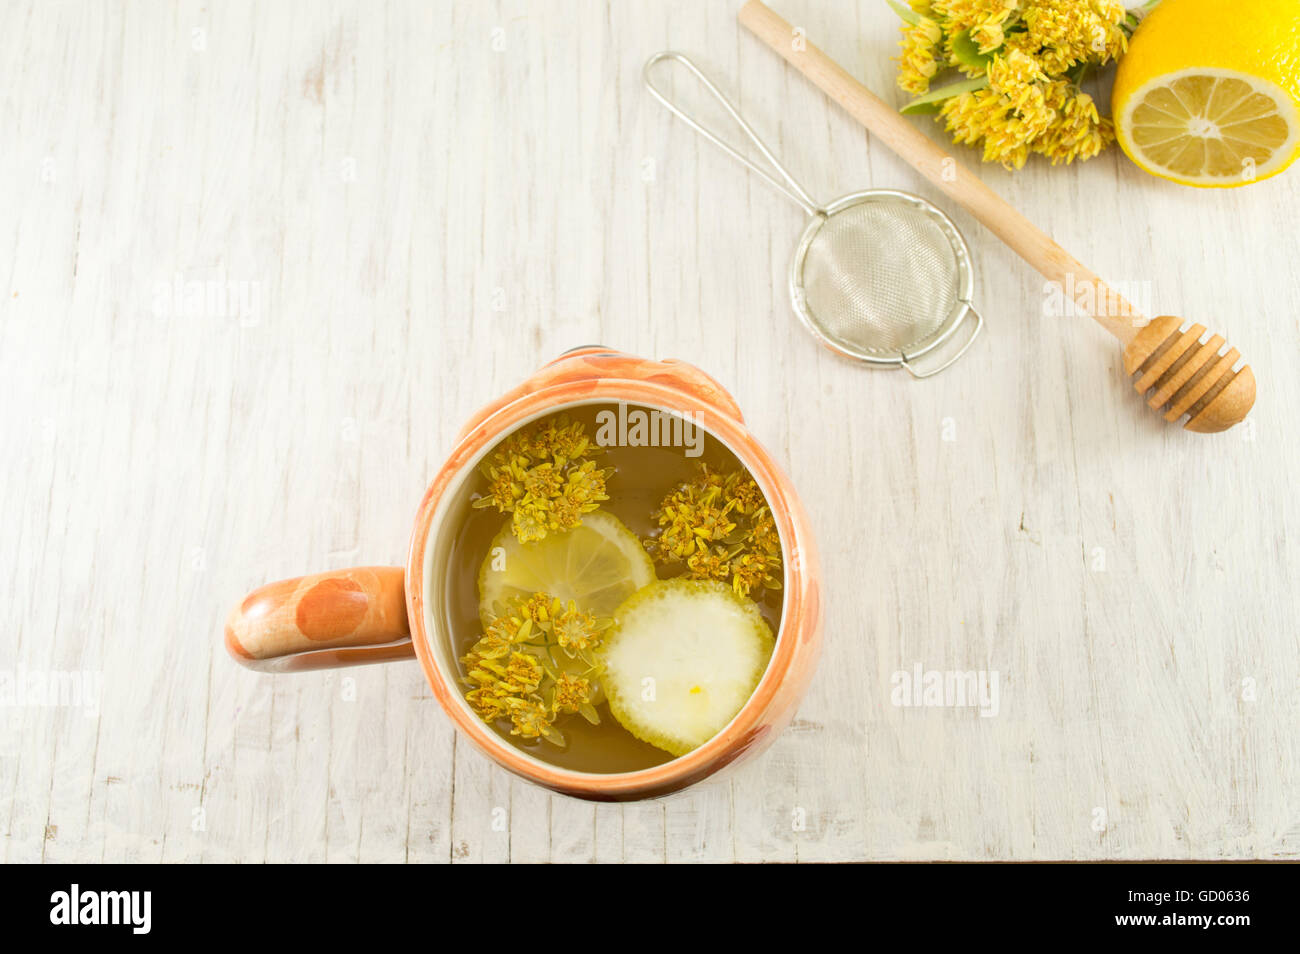 Linden Tea with fresh flowers and lemon served Stock Photo